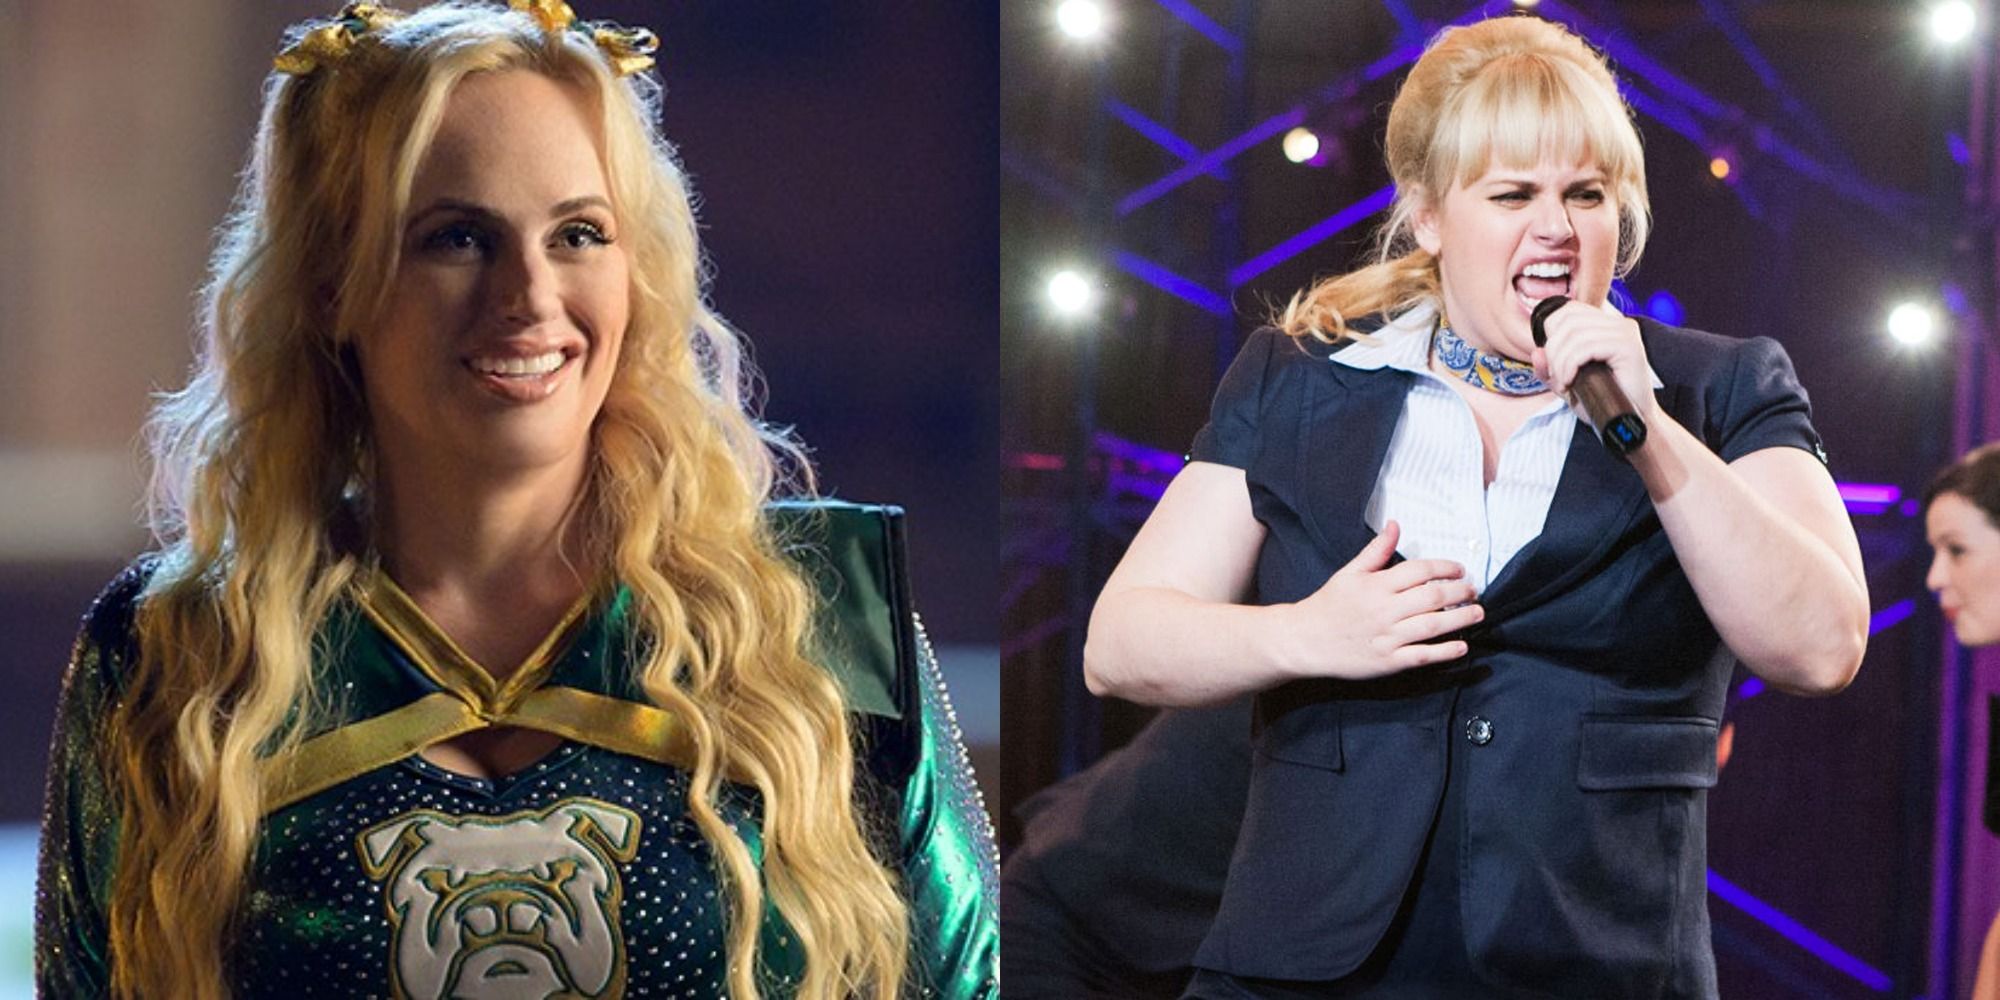 Split image showing Rebel Wilson in Senior Year and Pitch Perfect.